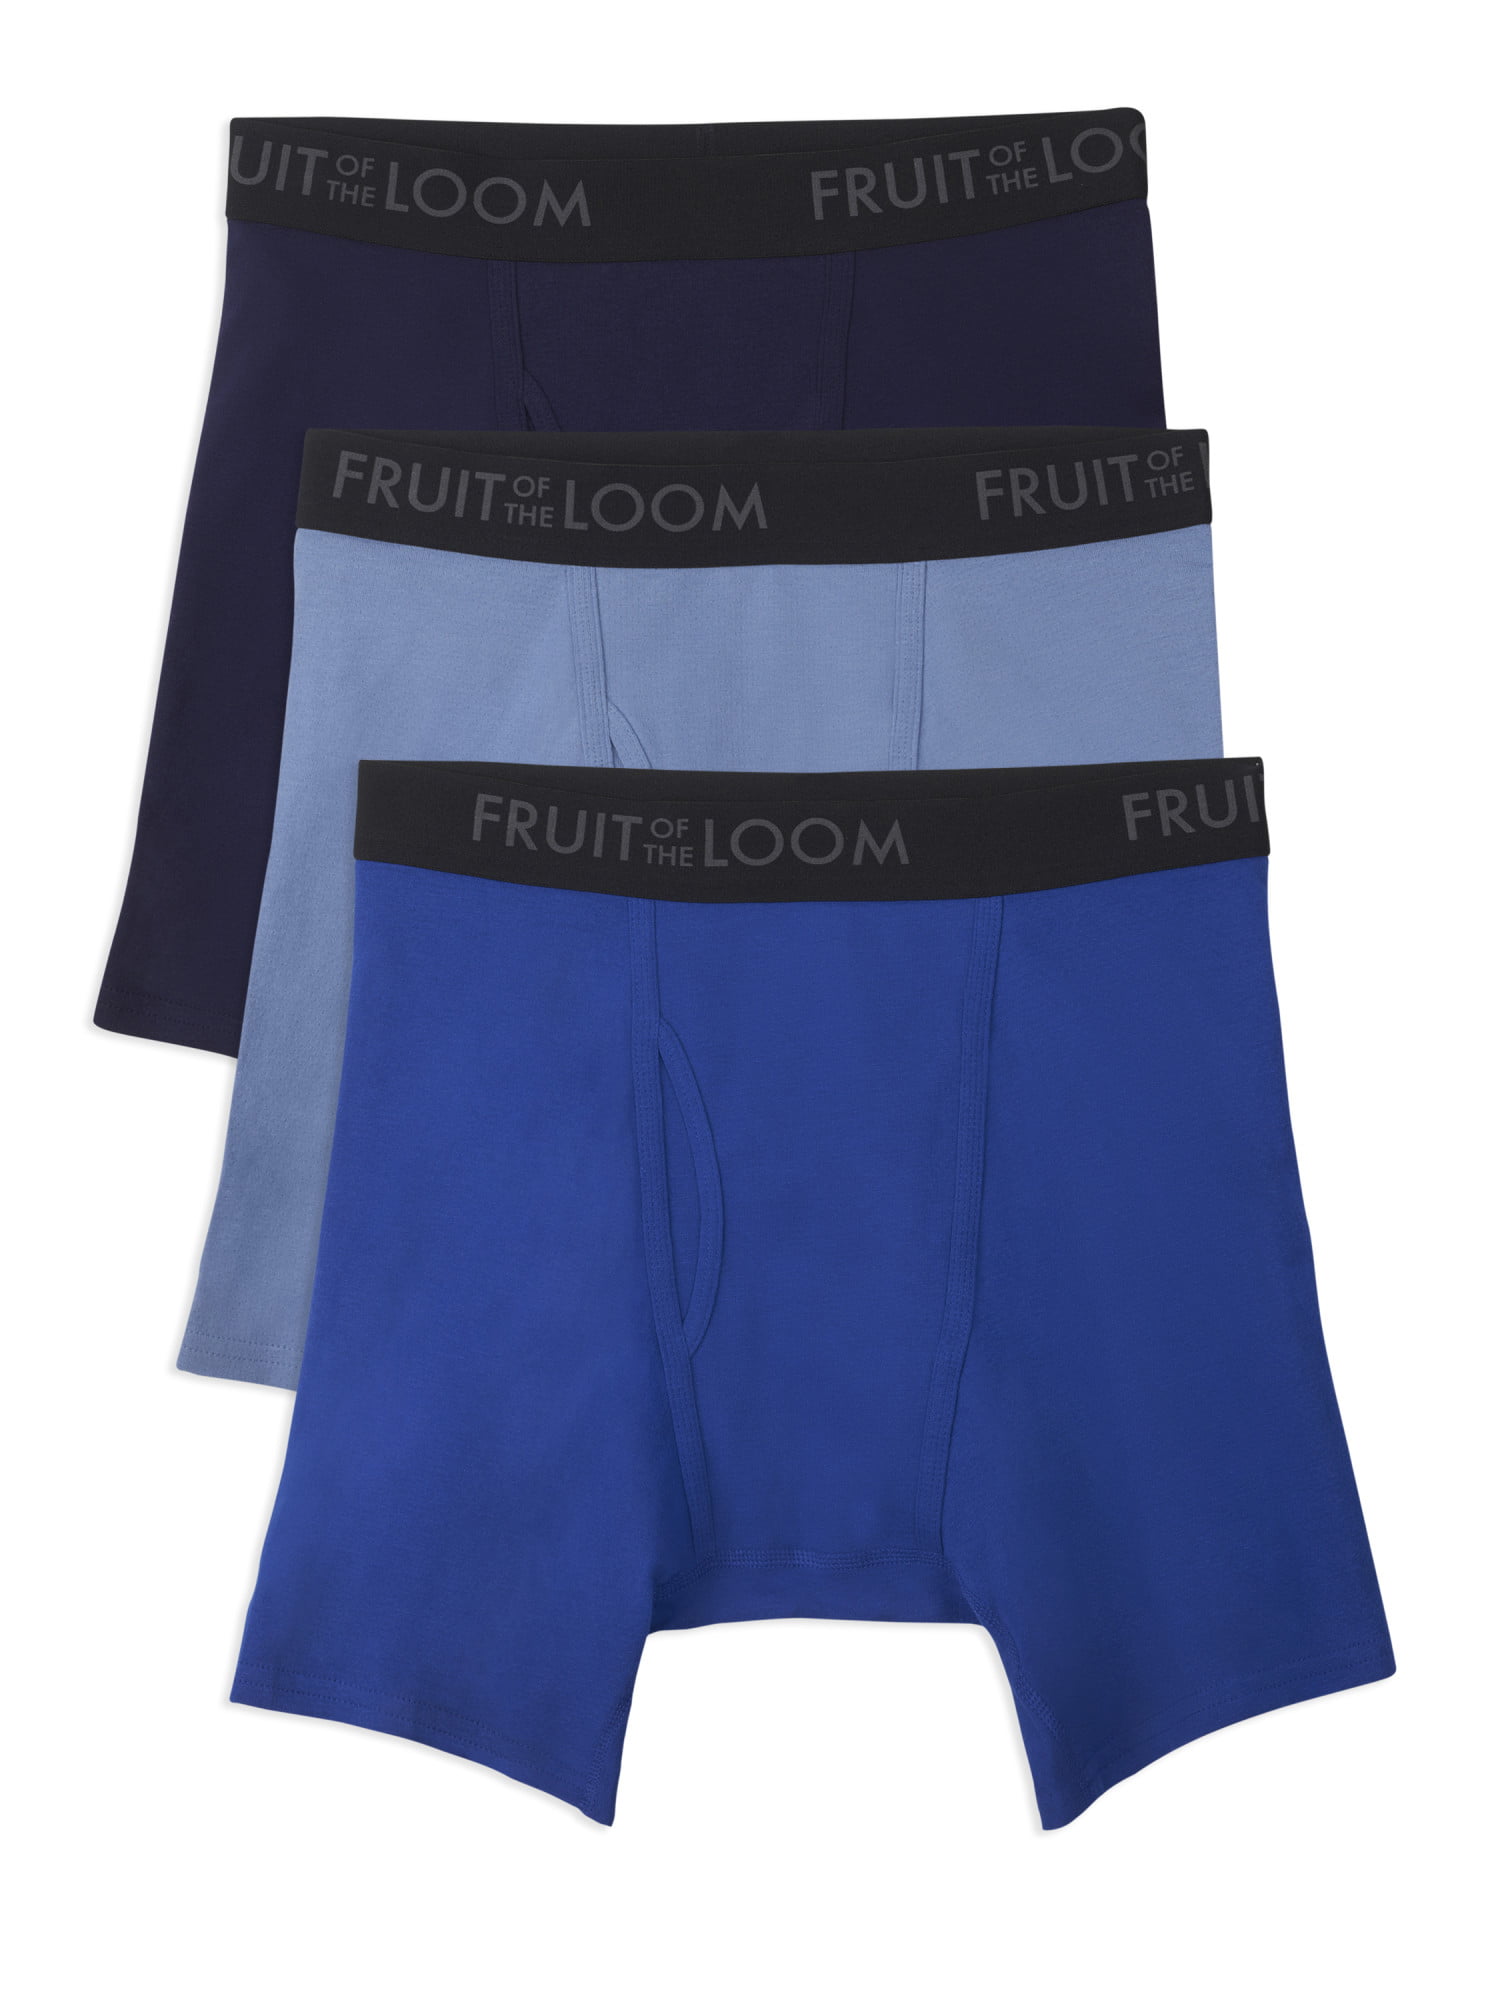 Fruit of the Loom Mens Breathable Underwear